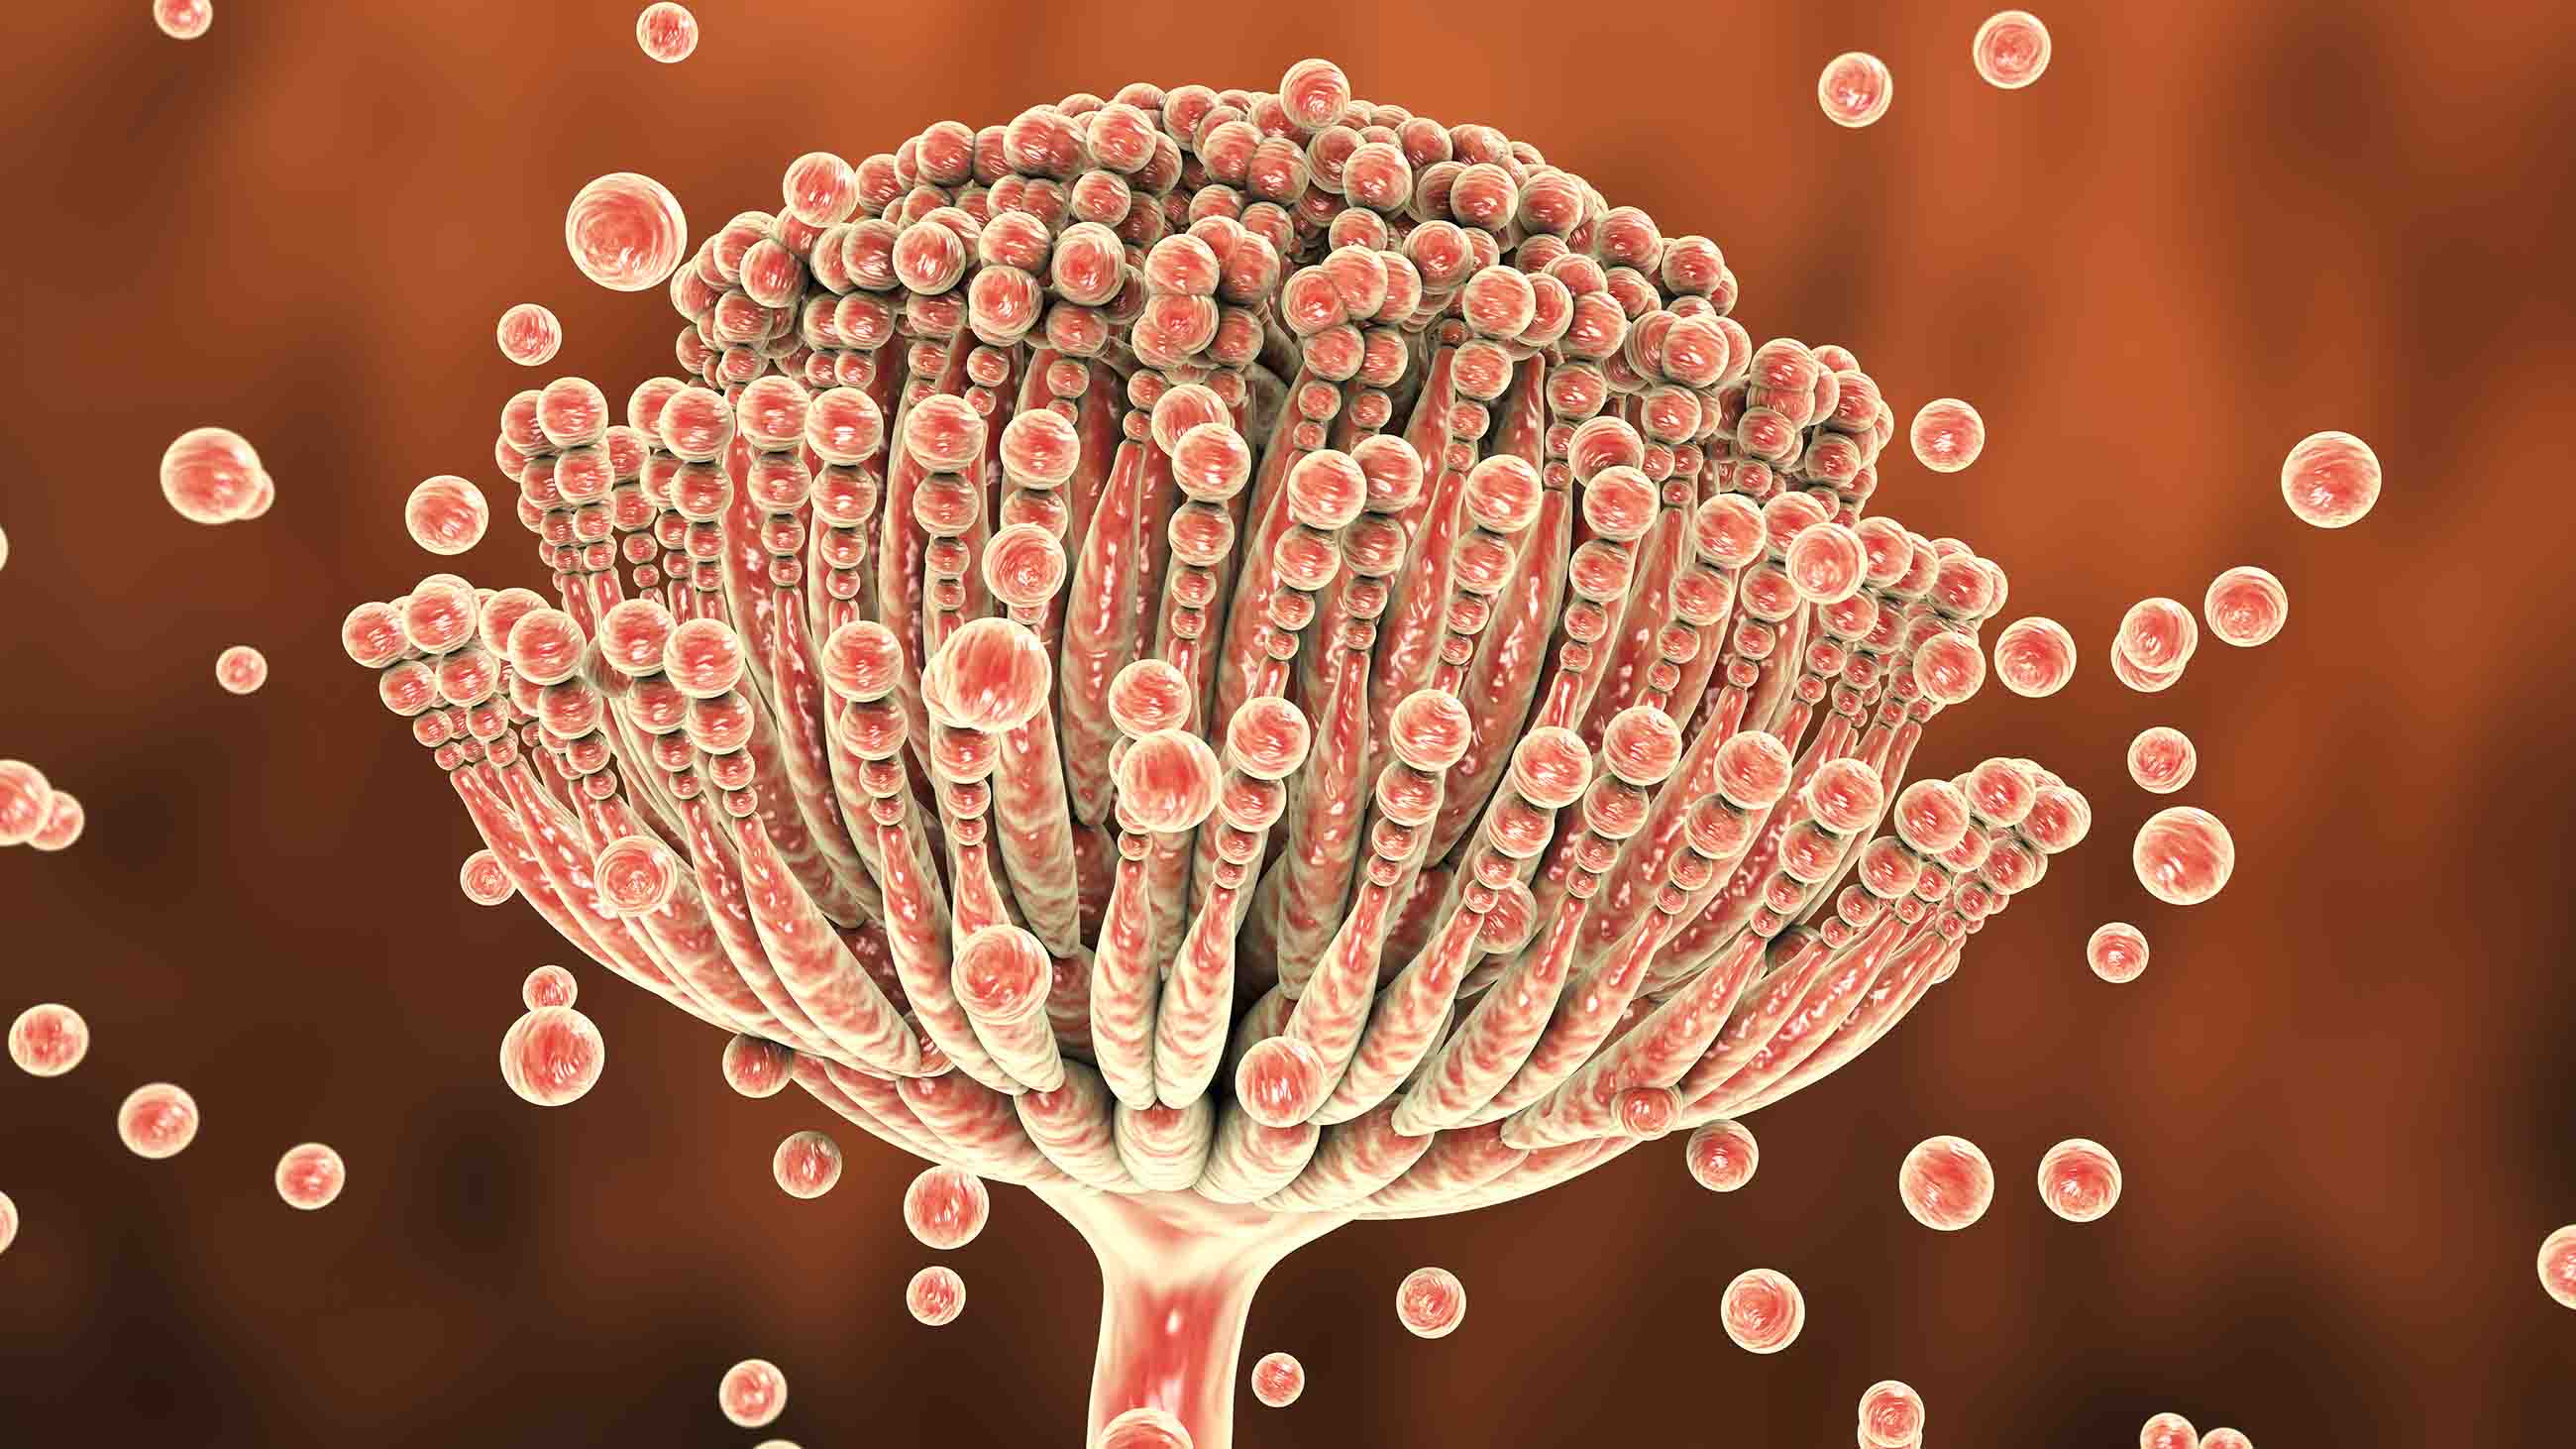 A computer illustration of the Aspergillus fungus, which produces aflatoxin, one of the most powerful naturally occurring carcinogens.